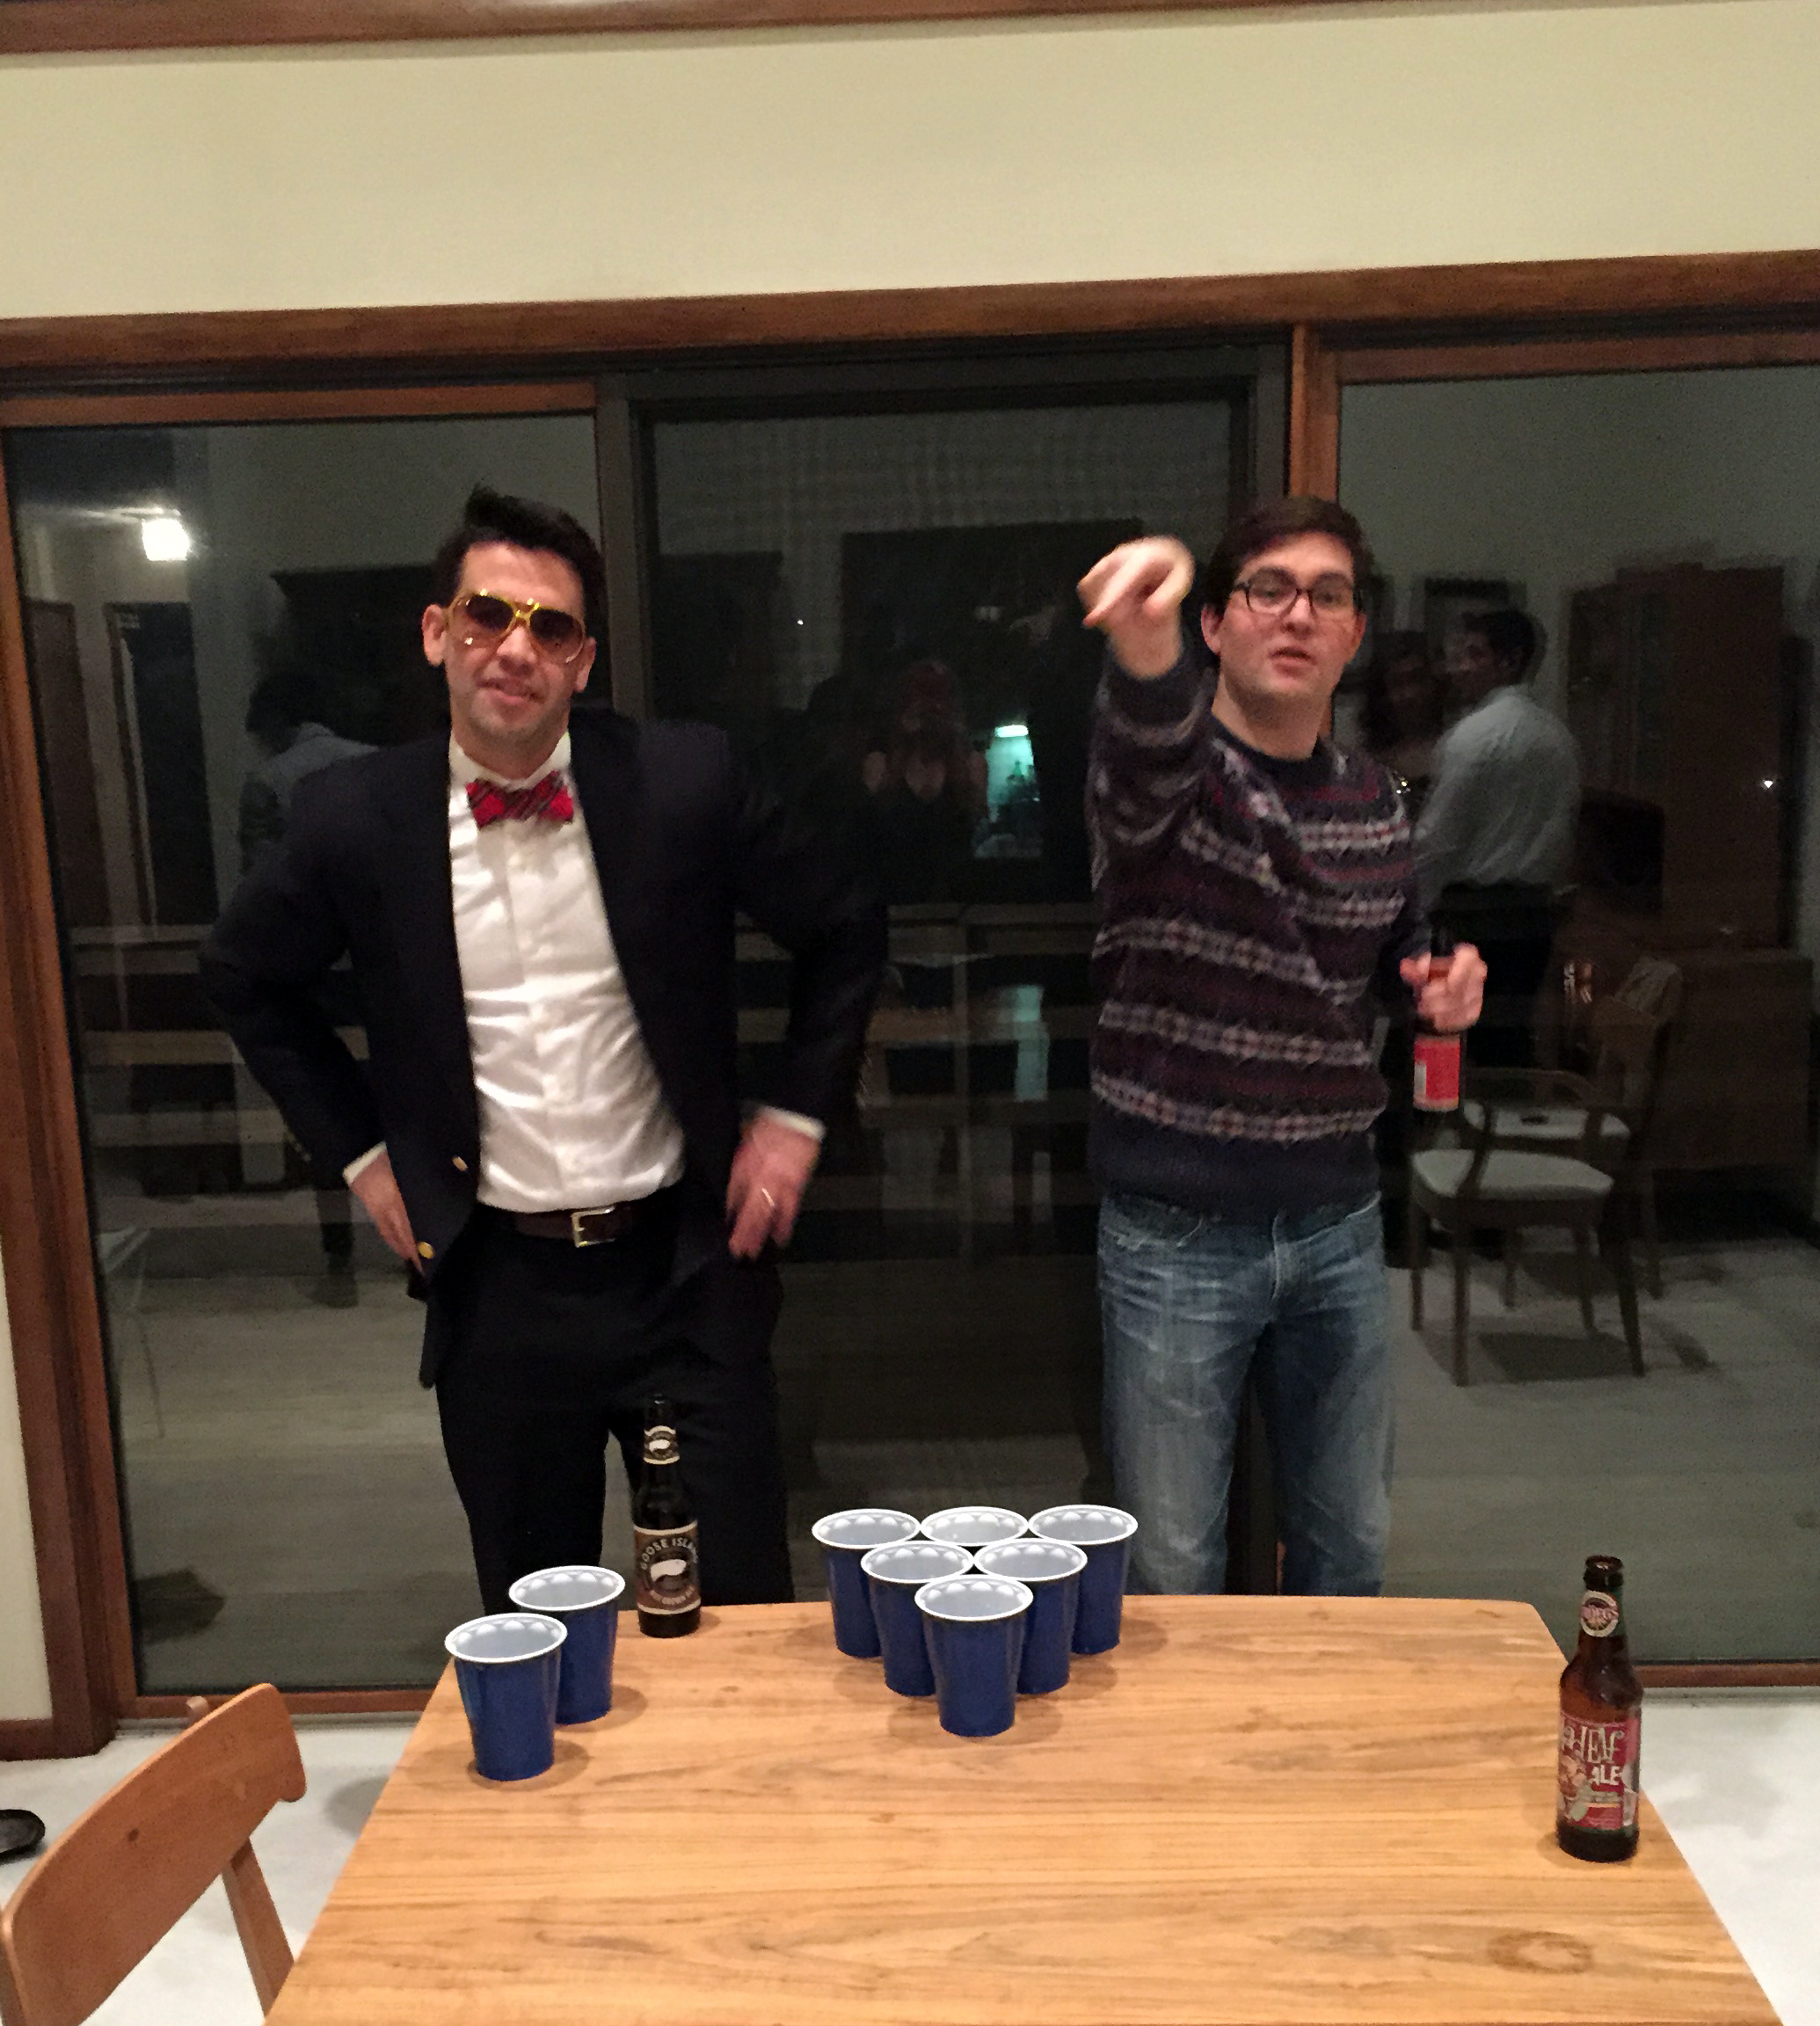 chris and ross playing pong